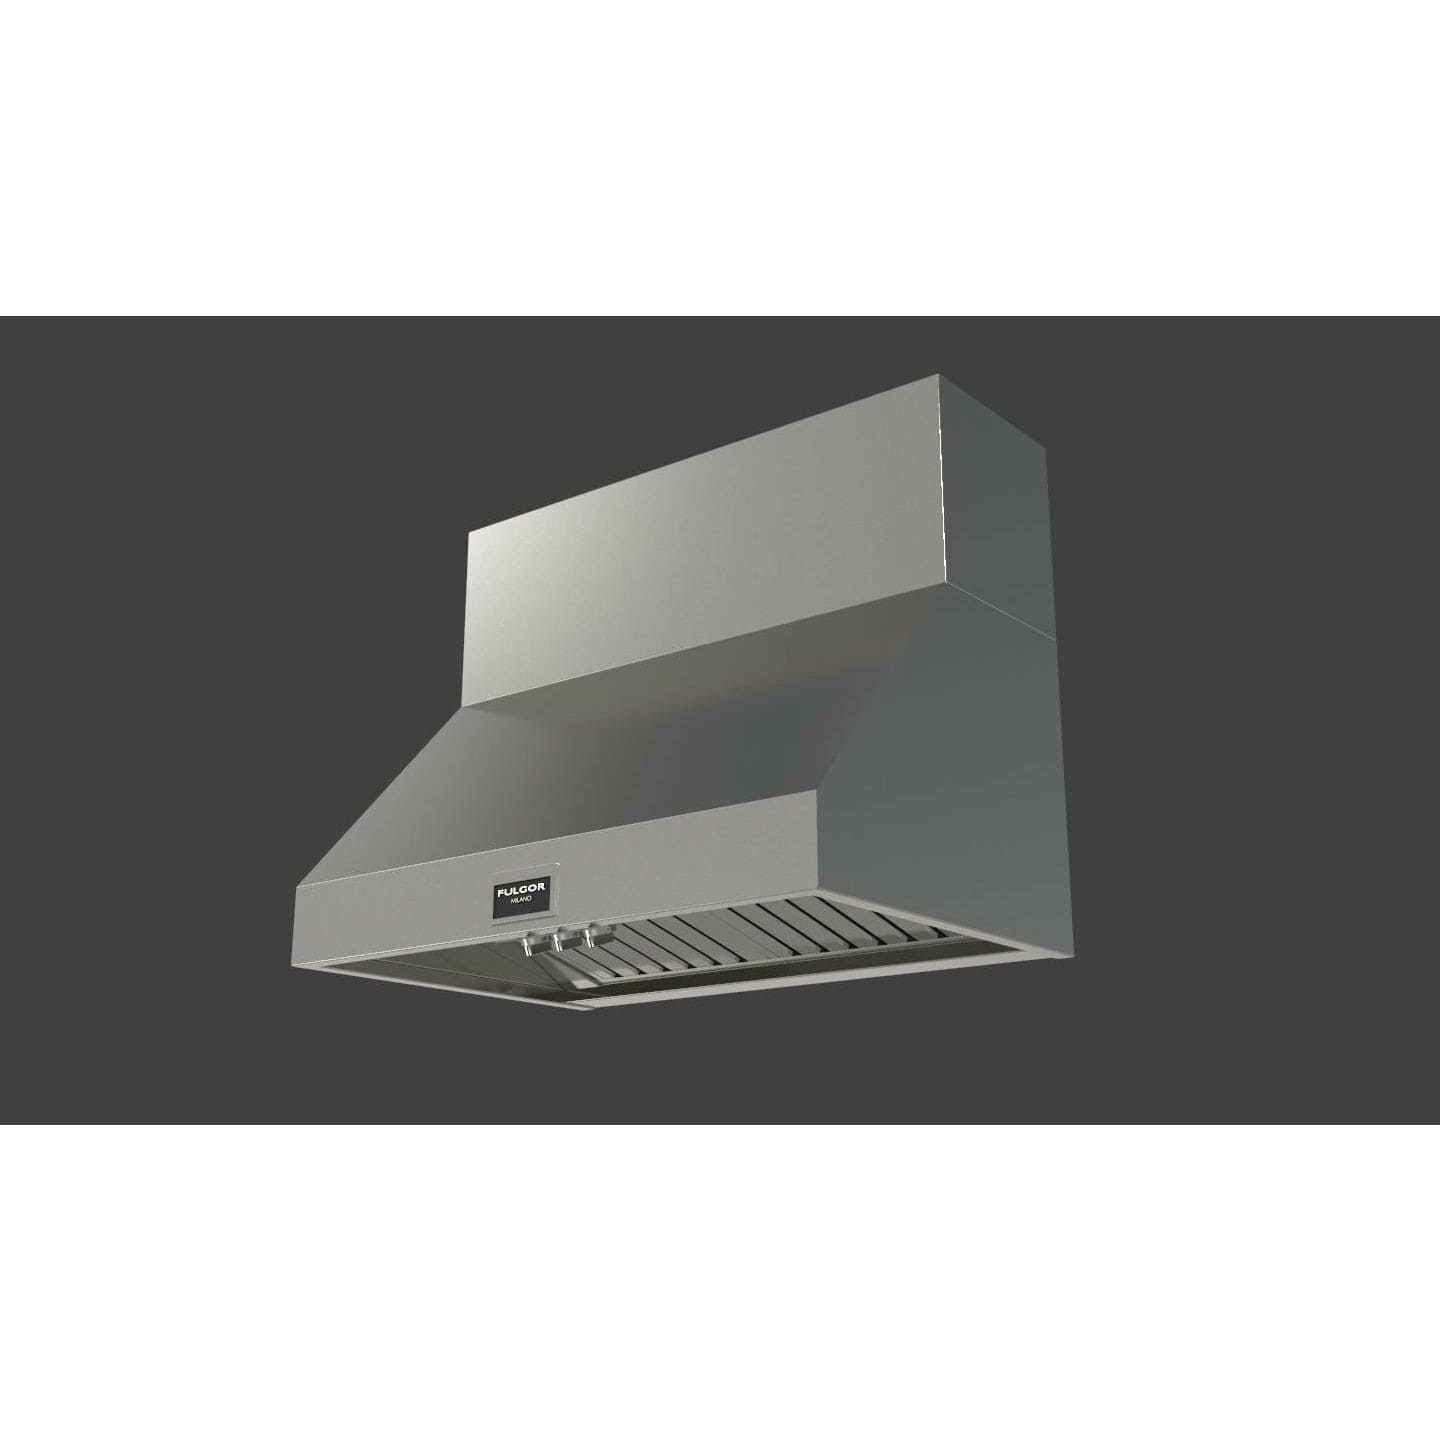 Fulgor Milano Package - 36" Dual Fuel Range, 36" French Door Refrigerator, 24" Built-In Dishwasher and 36" Wall Range Hood Ranges F6PDF366S1F6FBM36S2 Luxury Appliances Direct